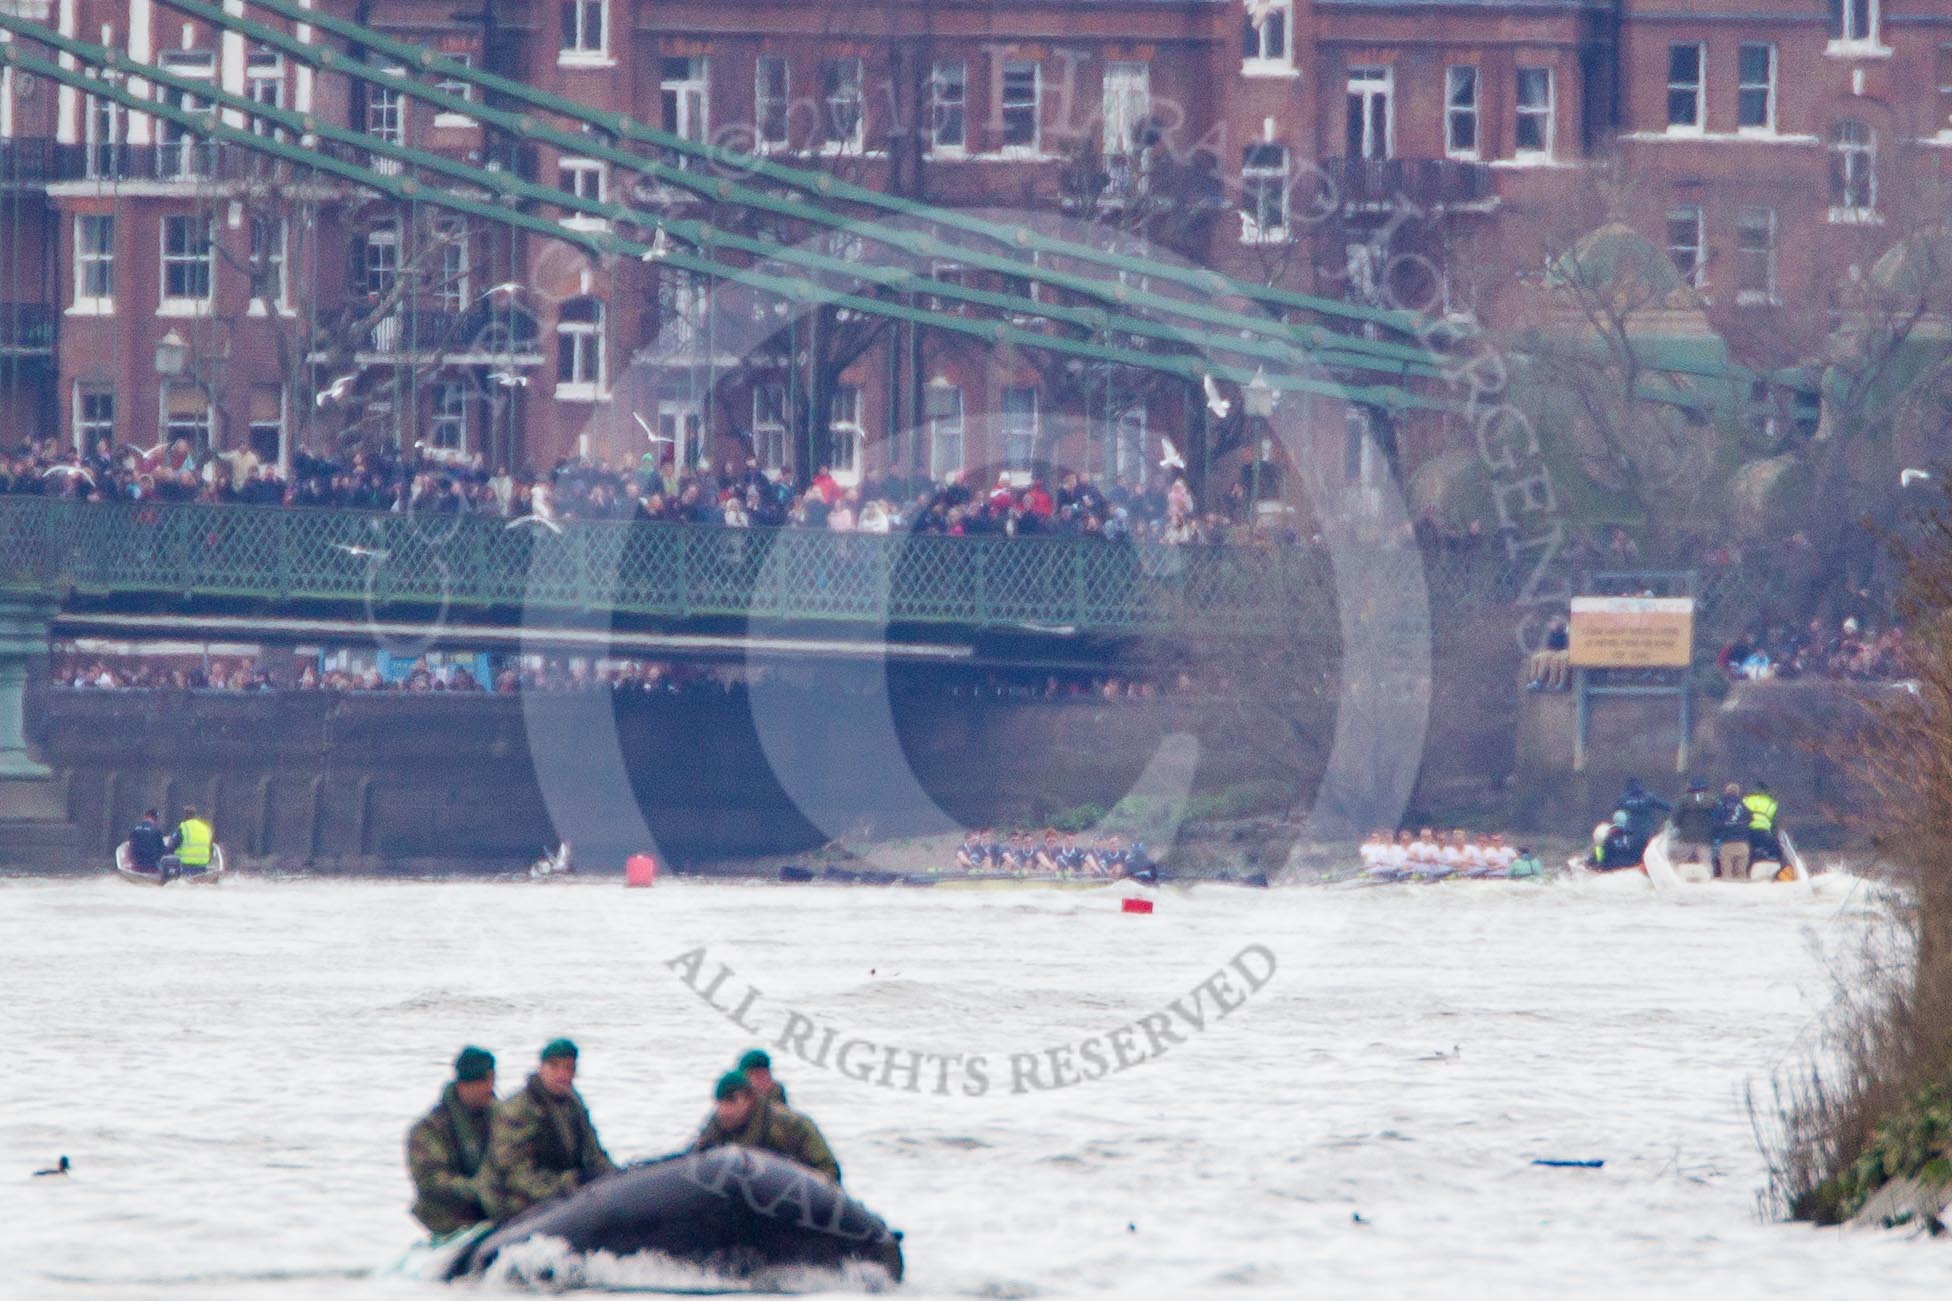 The Boat Race 2013.
Putney,
London SW15,

United Kingdom,
on 31 March 2013 at 16:06, image #217